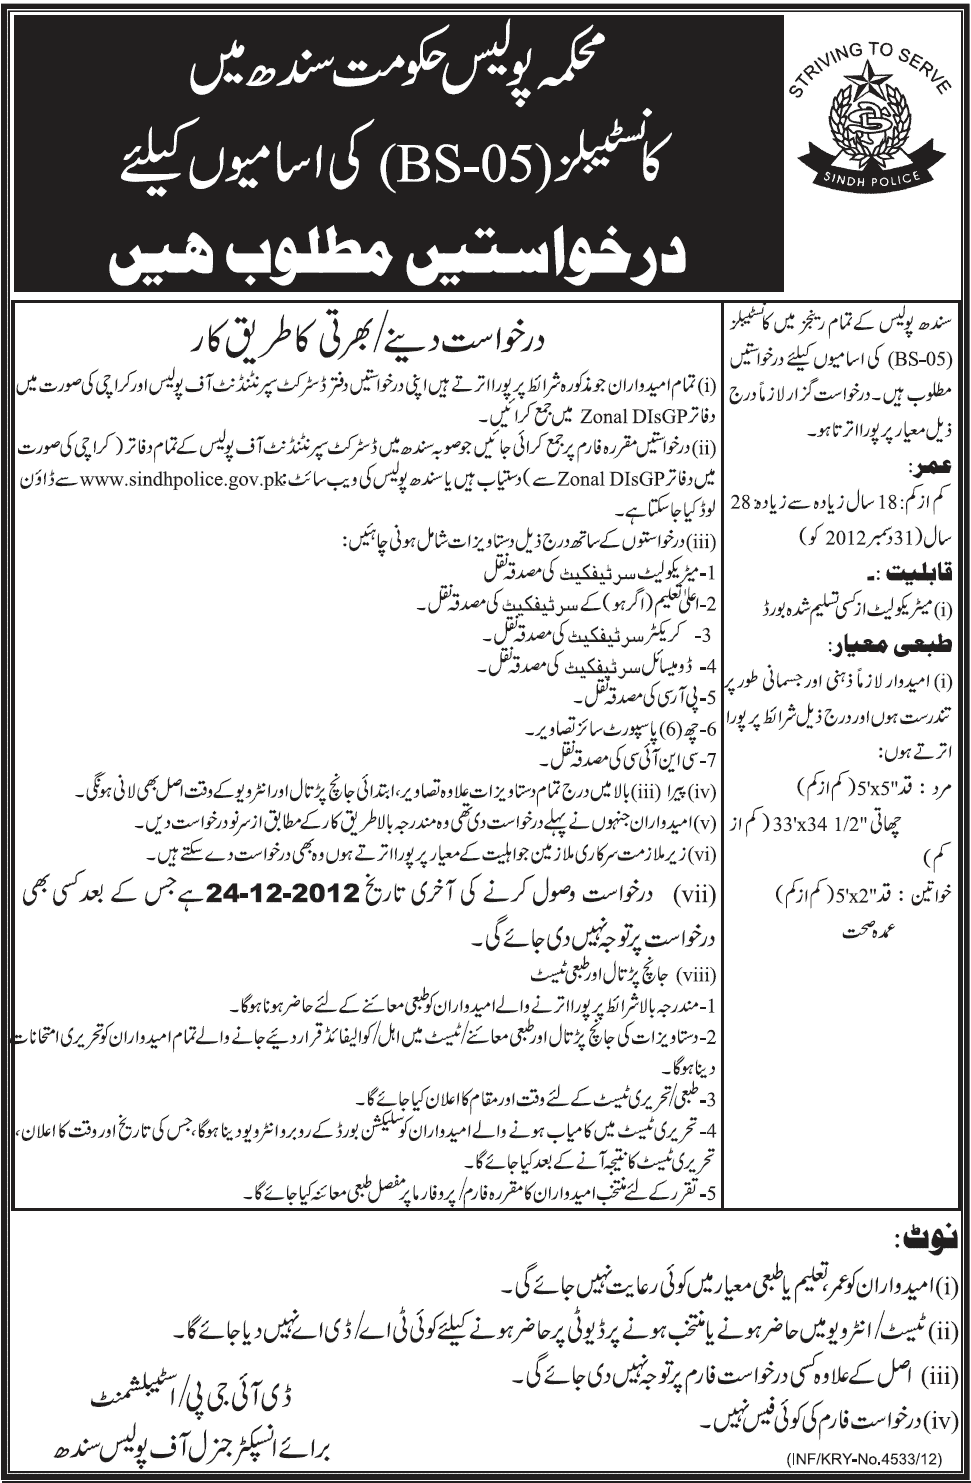 Sindh Police Constable Jobs 2012 PC www.sindhpolice.gov.pk